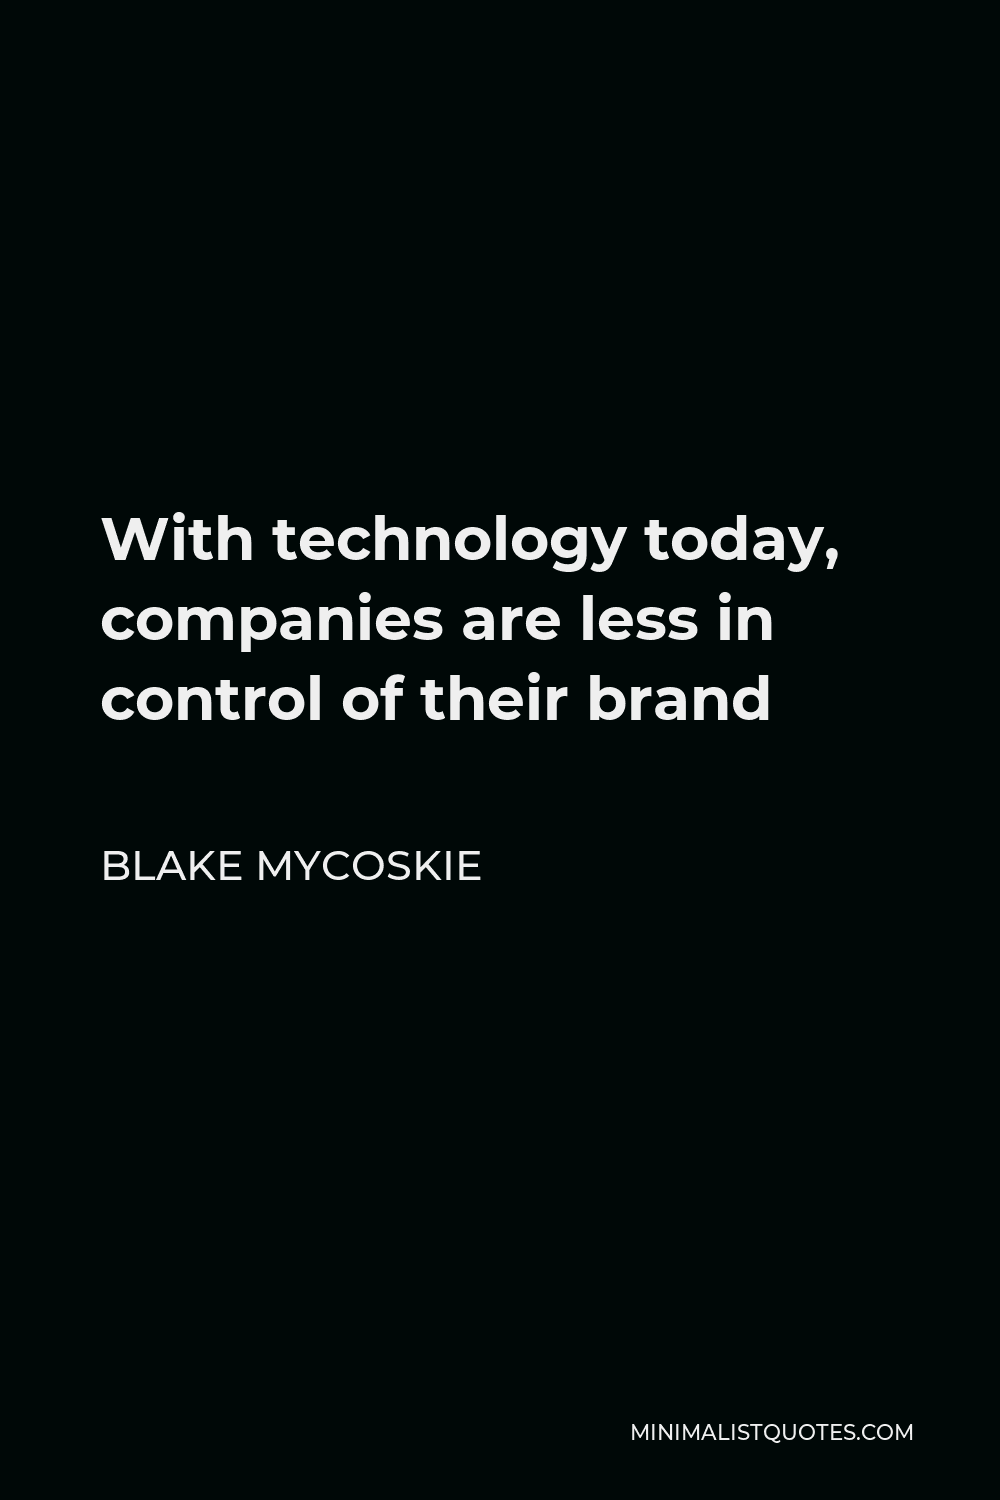 Blake Mycoskie Quote - With technology today, companies are less in control of their brand